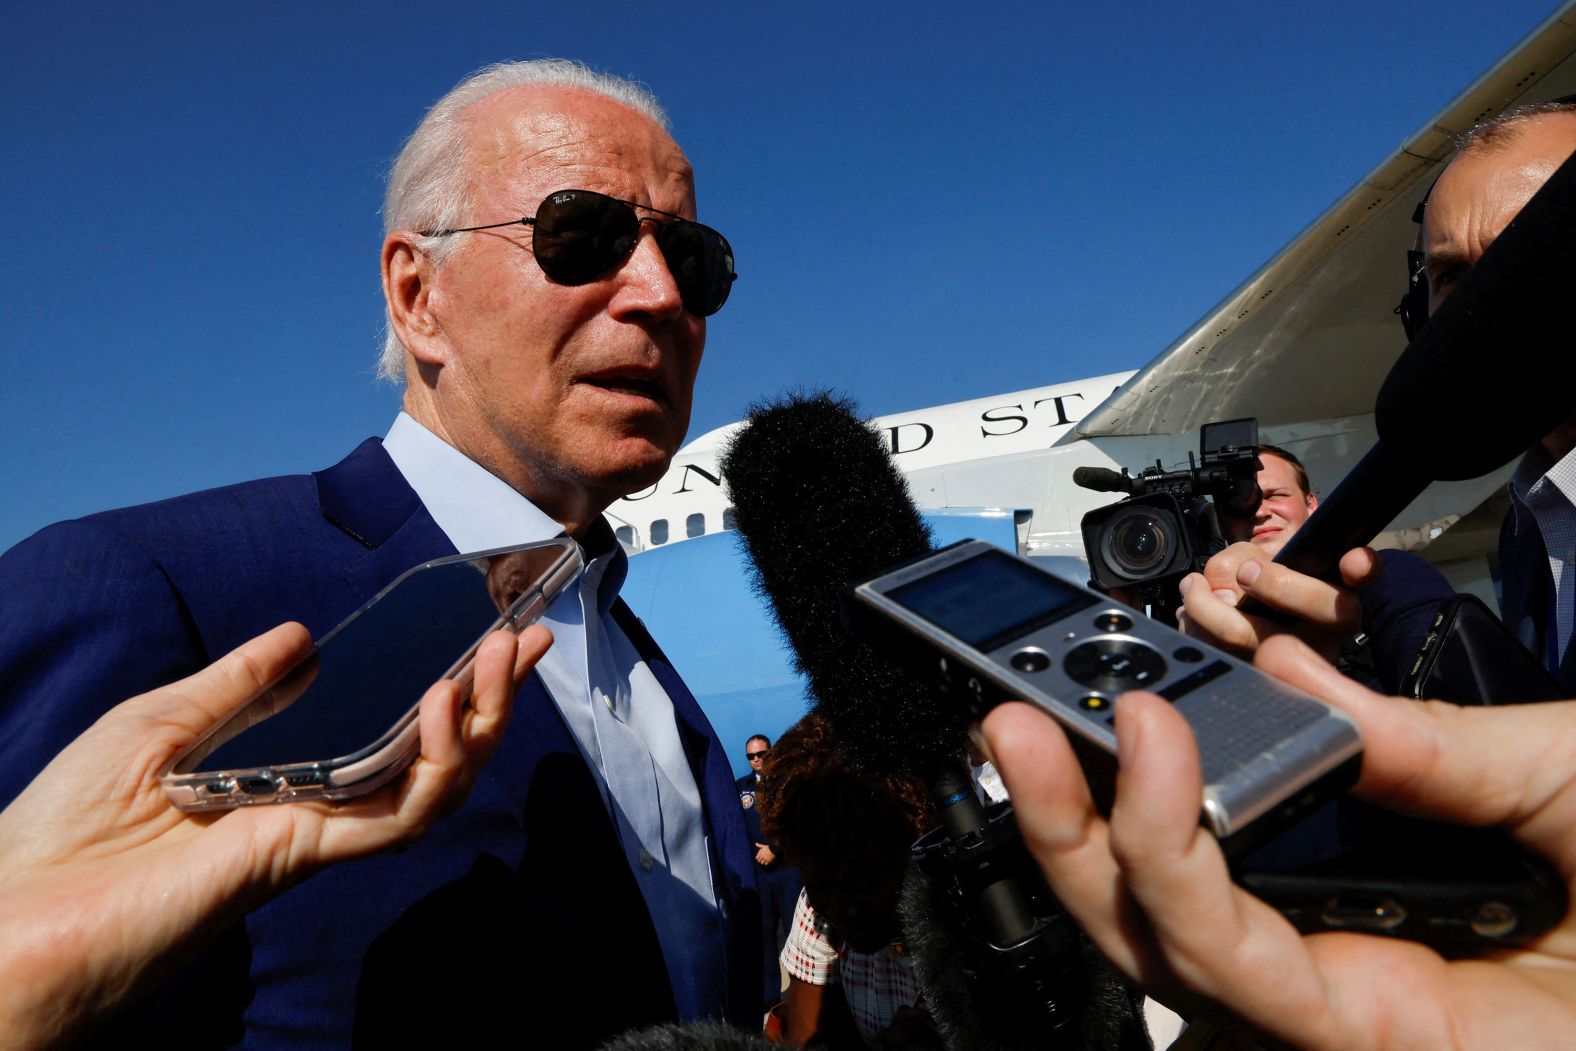 Biden speaks to the press as he arrives at Joint Base Andrews in Maryland in July 2022. The following morning, White House press secretary Karine Jean-Pierre said <a href="index.php?page=&url=https%3A%2F%2Fwww.cnn.com%2F2022%2F07%2F21%2Fpolitics%2Fjoe-biden-covid-19%2Findex.html" target="_blank">the President had tested positive for Covid-19</a>.